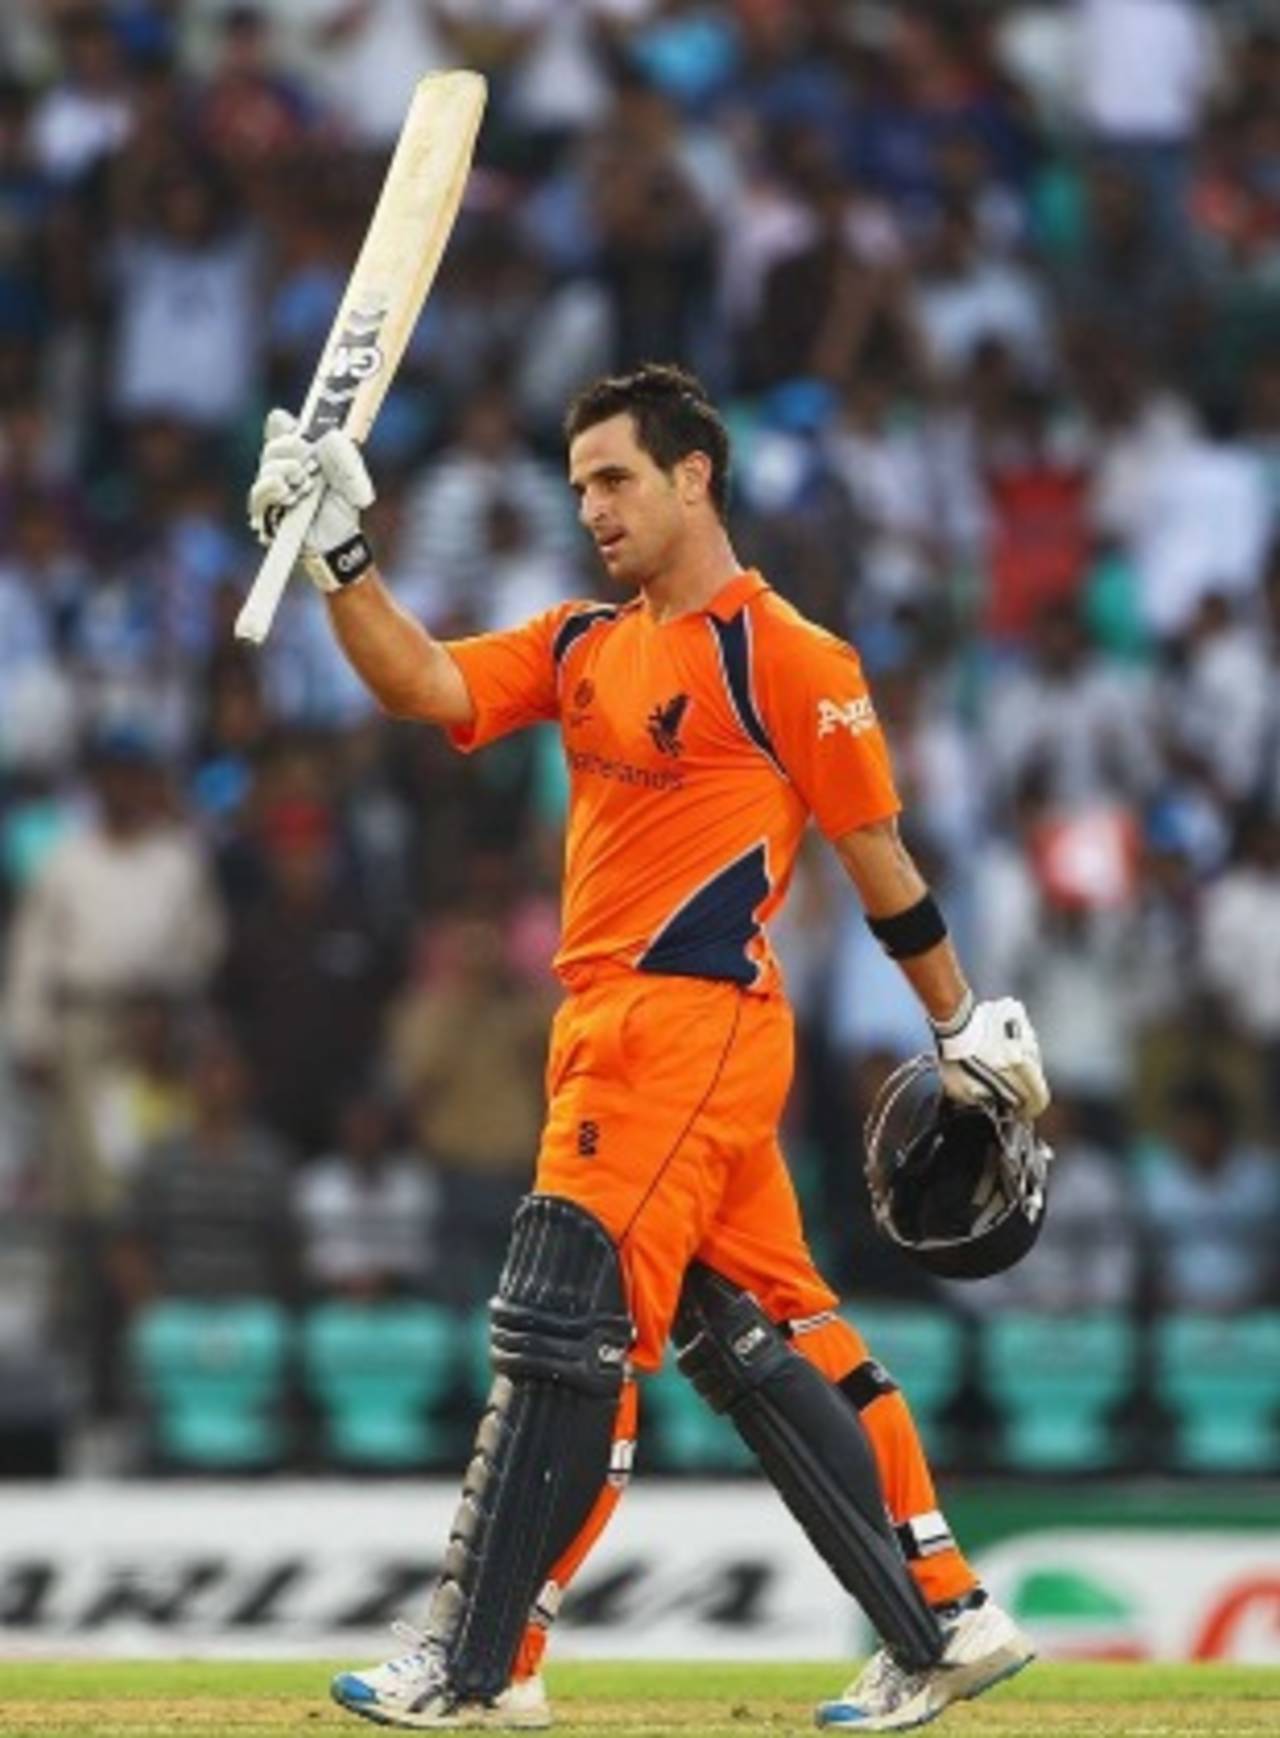 Ryan ten Doeschate reached a brilliant hundred with five overthrows, England v Netherlands, Group B, World Cup, Nagpur, February 22, 2011